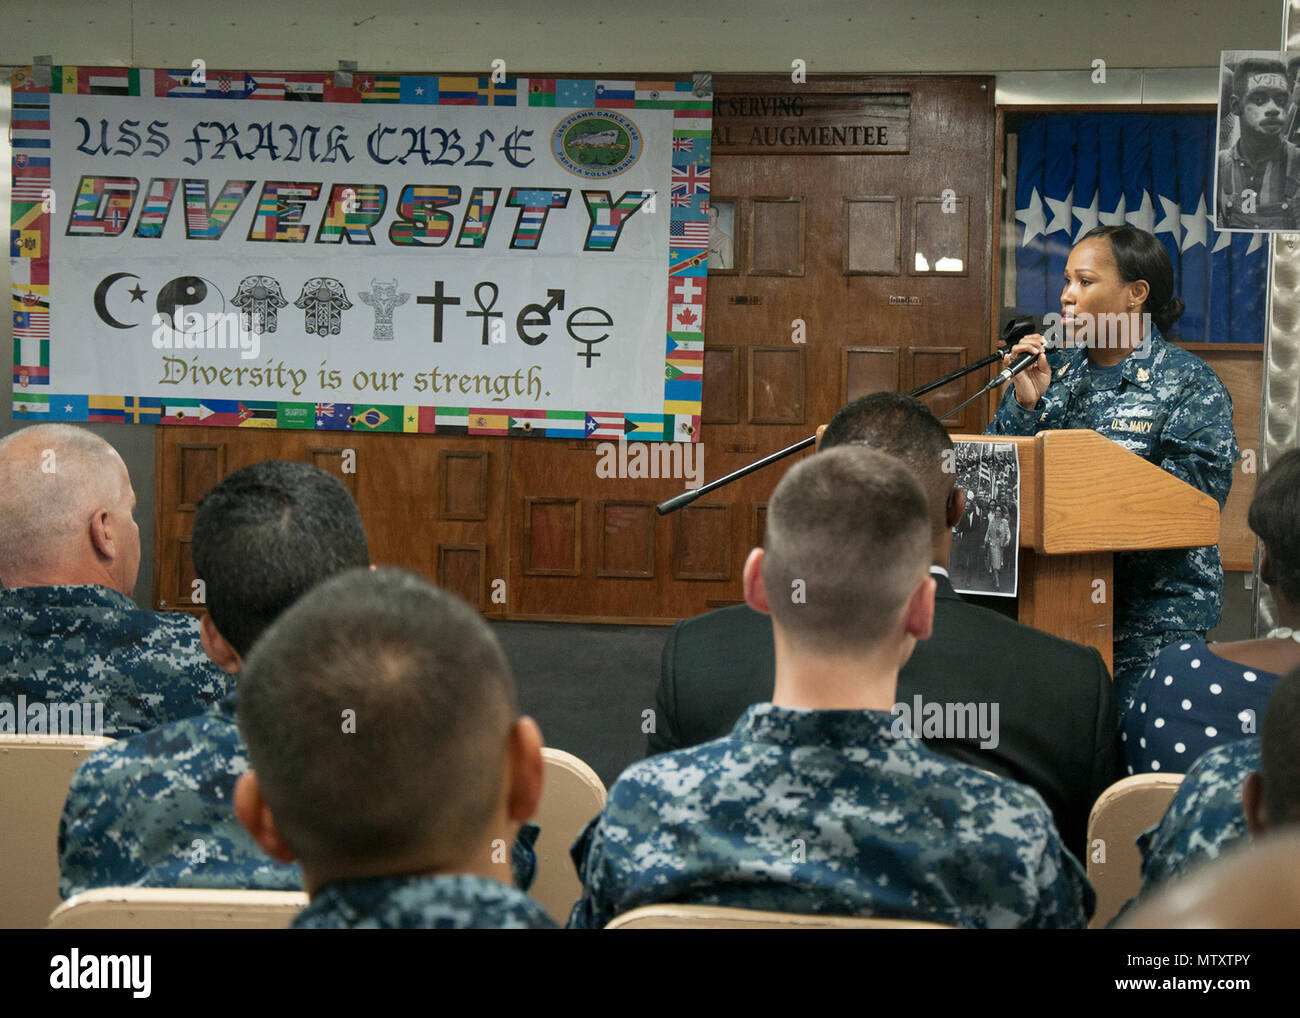 170131-N-DS883-036    SANTA RITA, Guam (Jan. 31, 2017) Senior Chief Electronics Technician LaToya Blaine, a Sailor assigned to the submarine tender USS Frank Cable (AS 40), speaks during a ceremony honoring Dr. Martin Luther King Jr. aboard the ship, January 31. The ship’s diversity committee held the event to reenact the1965 Selma-to-Montgomery March for voting rights led by Martin Luther King Jr.’s Southern Christian Leadership Conference. (U.S. Navy photo by Mass Communication Specialist Seaman Heather C. Wamsley/Released) Stock Photo